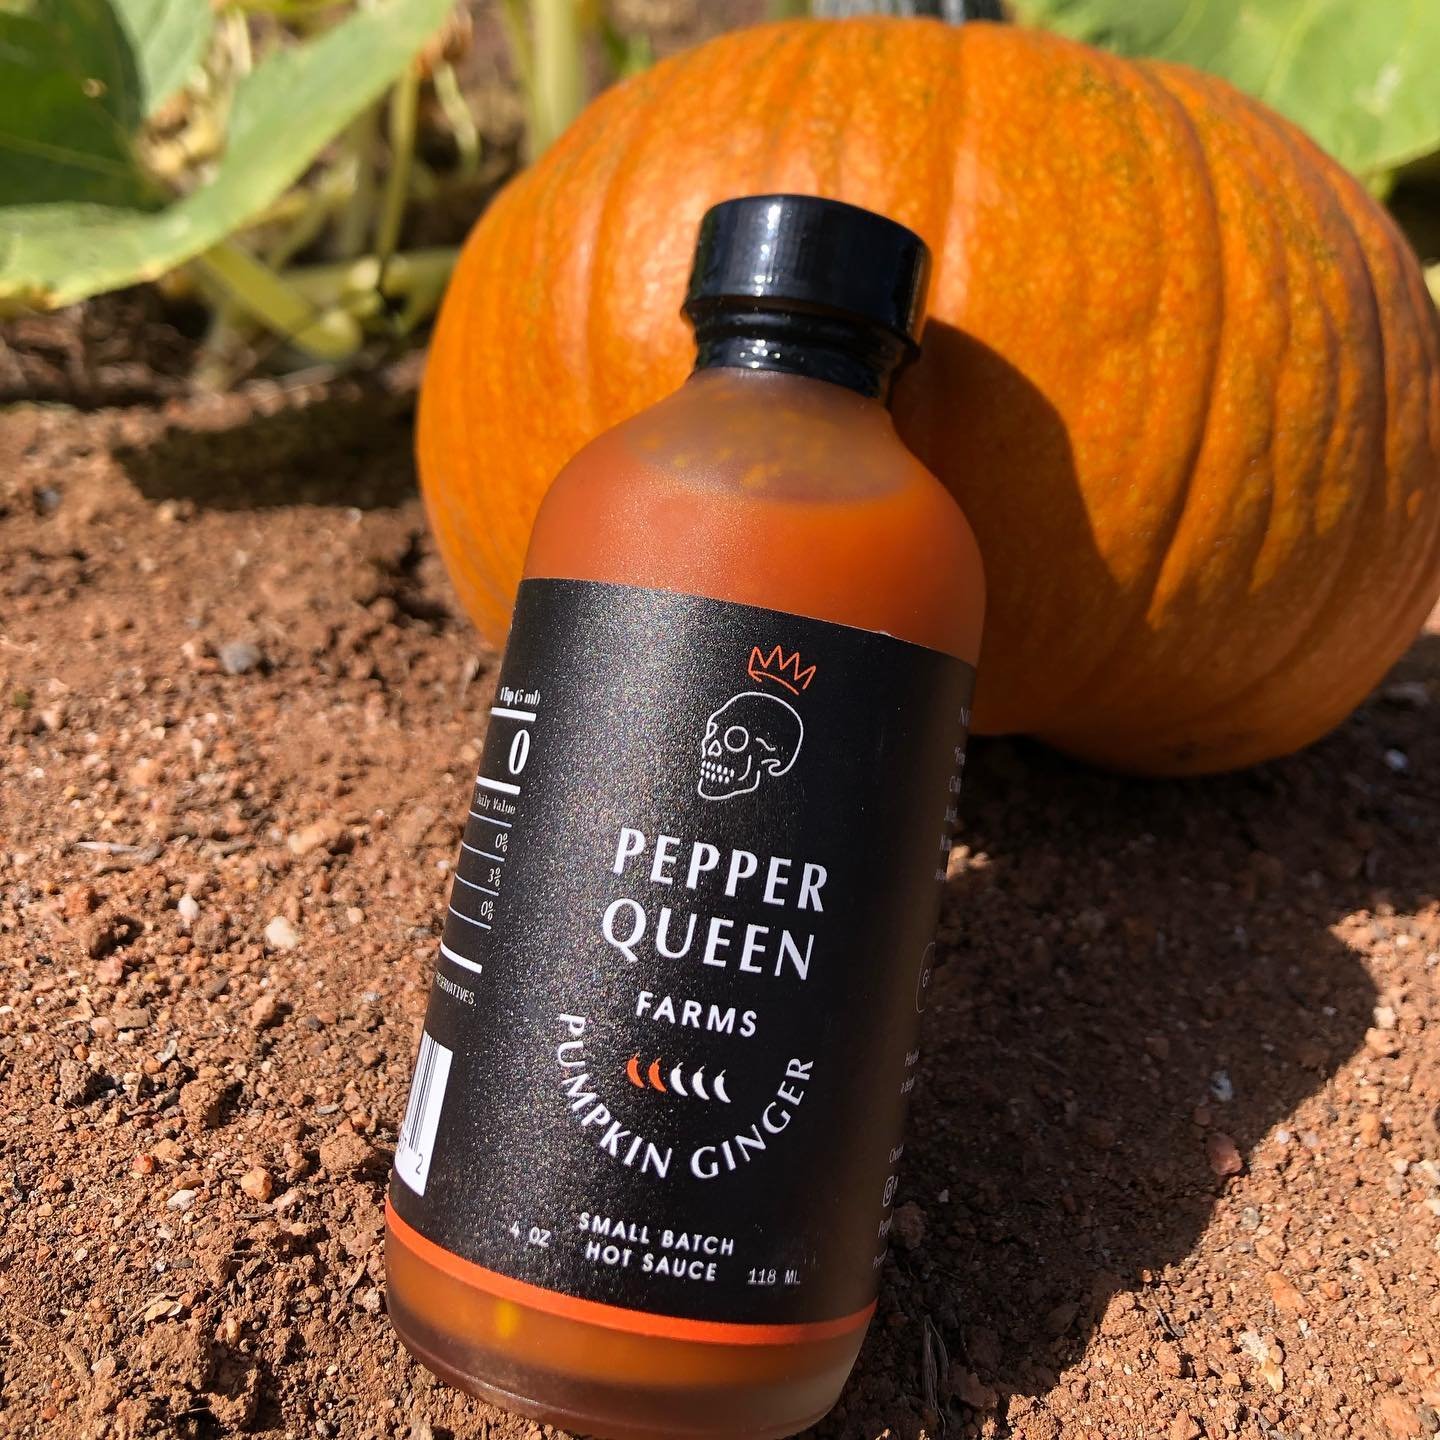 Back in stock! A limited seasonal batch. All Organic Ingredients. Peppers &amp; Pumpkins grown by yours truly. Other ingredients Locally Sourced. Now available on PepperQueen.com
&bull;
&bull;
&bull;
#organic #hotsauce #pumpkin #ginger #artisanmade #